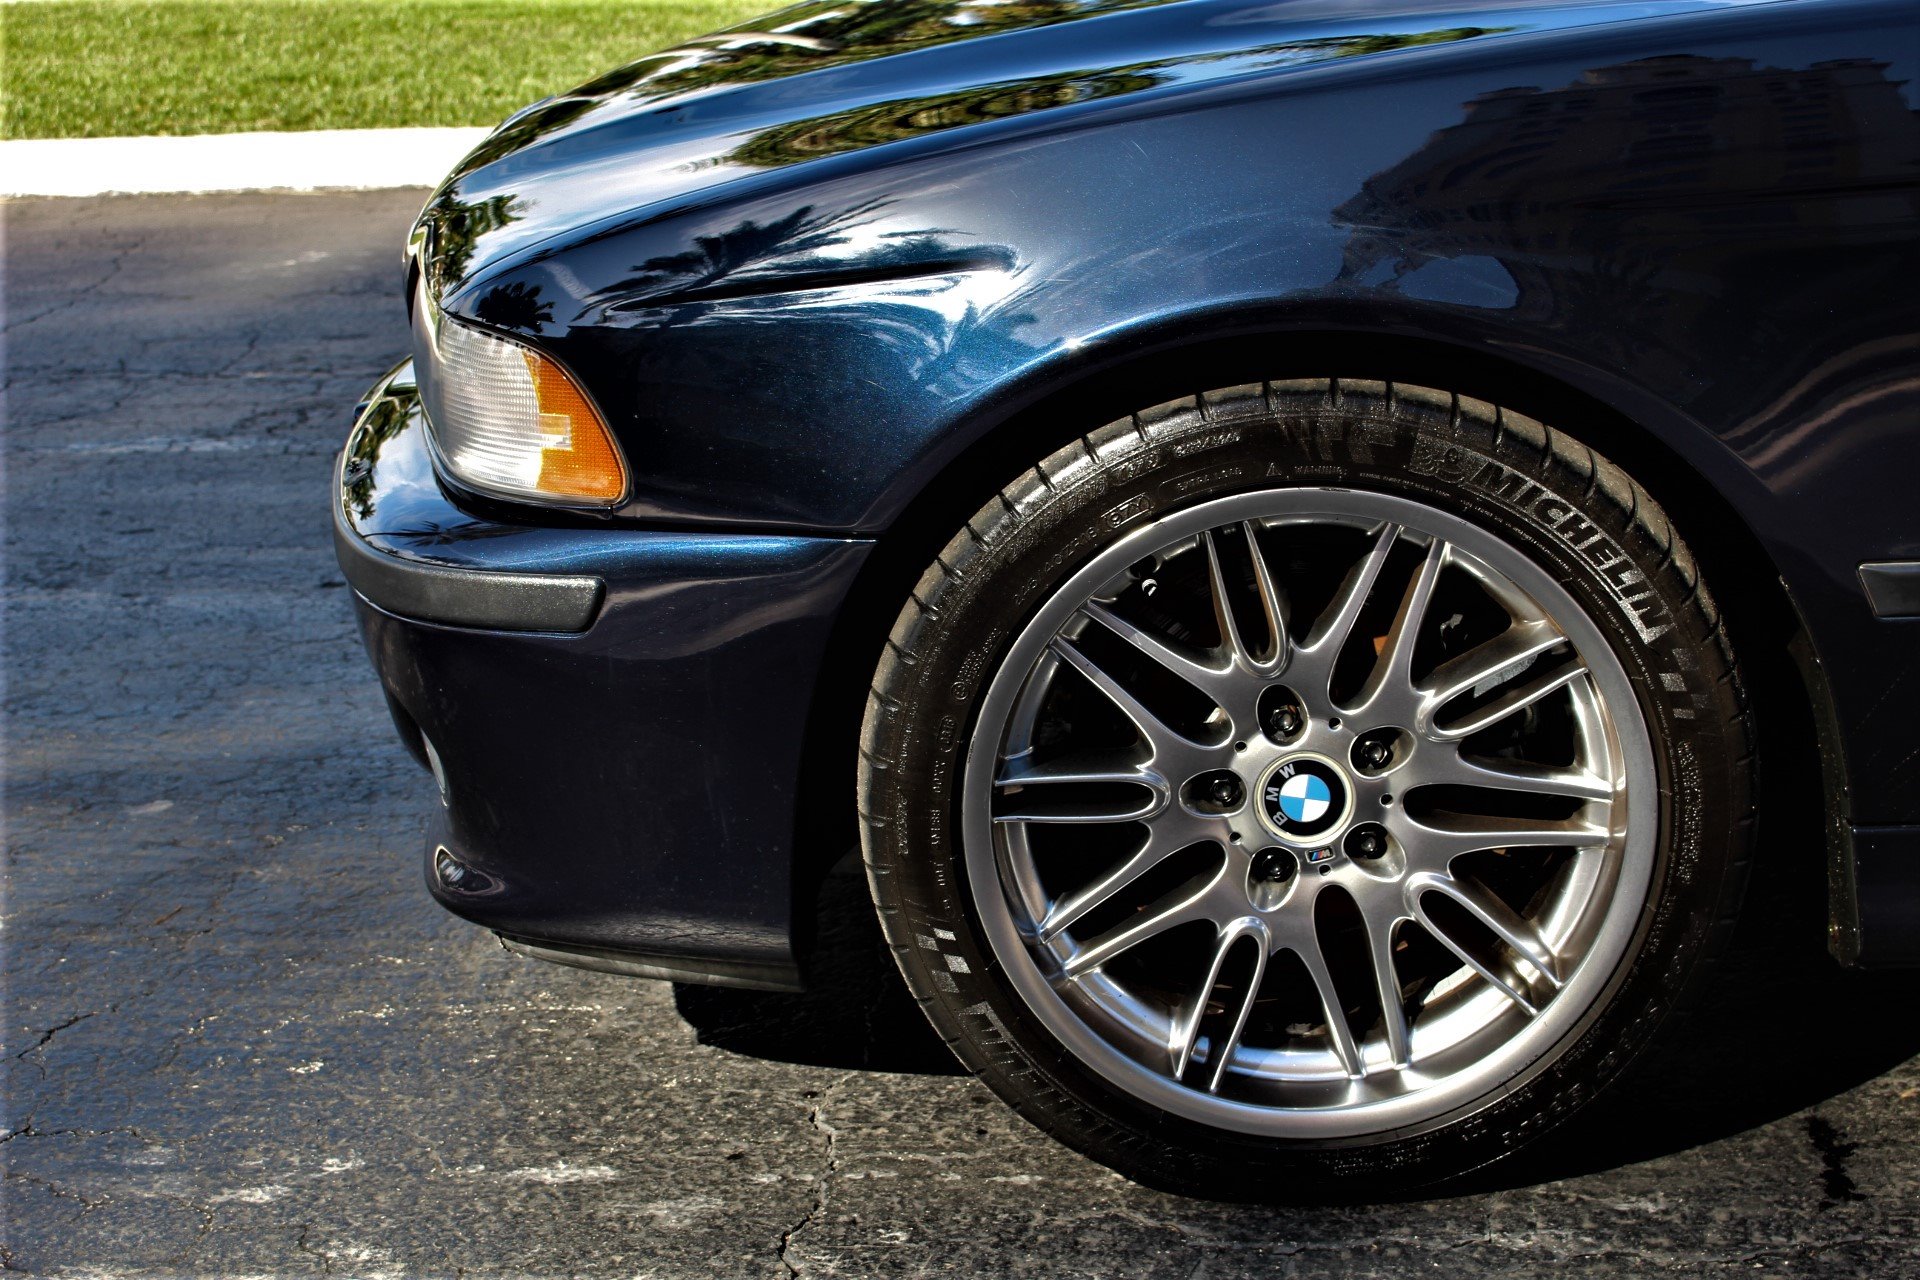 Used 2000 BMW M5 For Sale ($44,900)